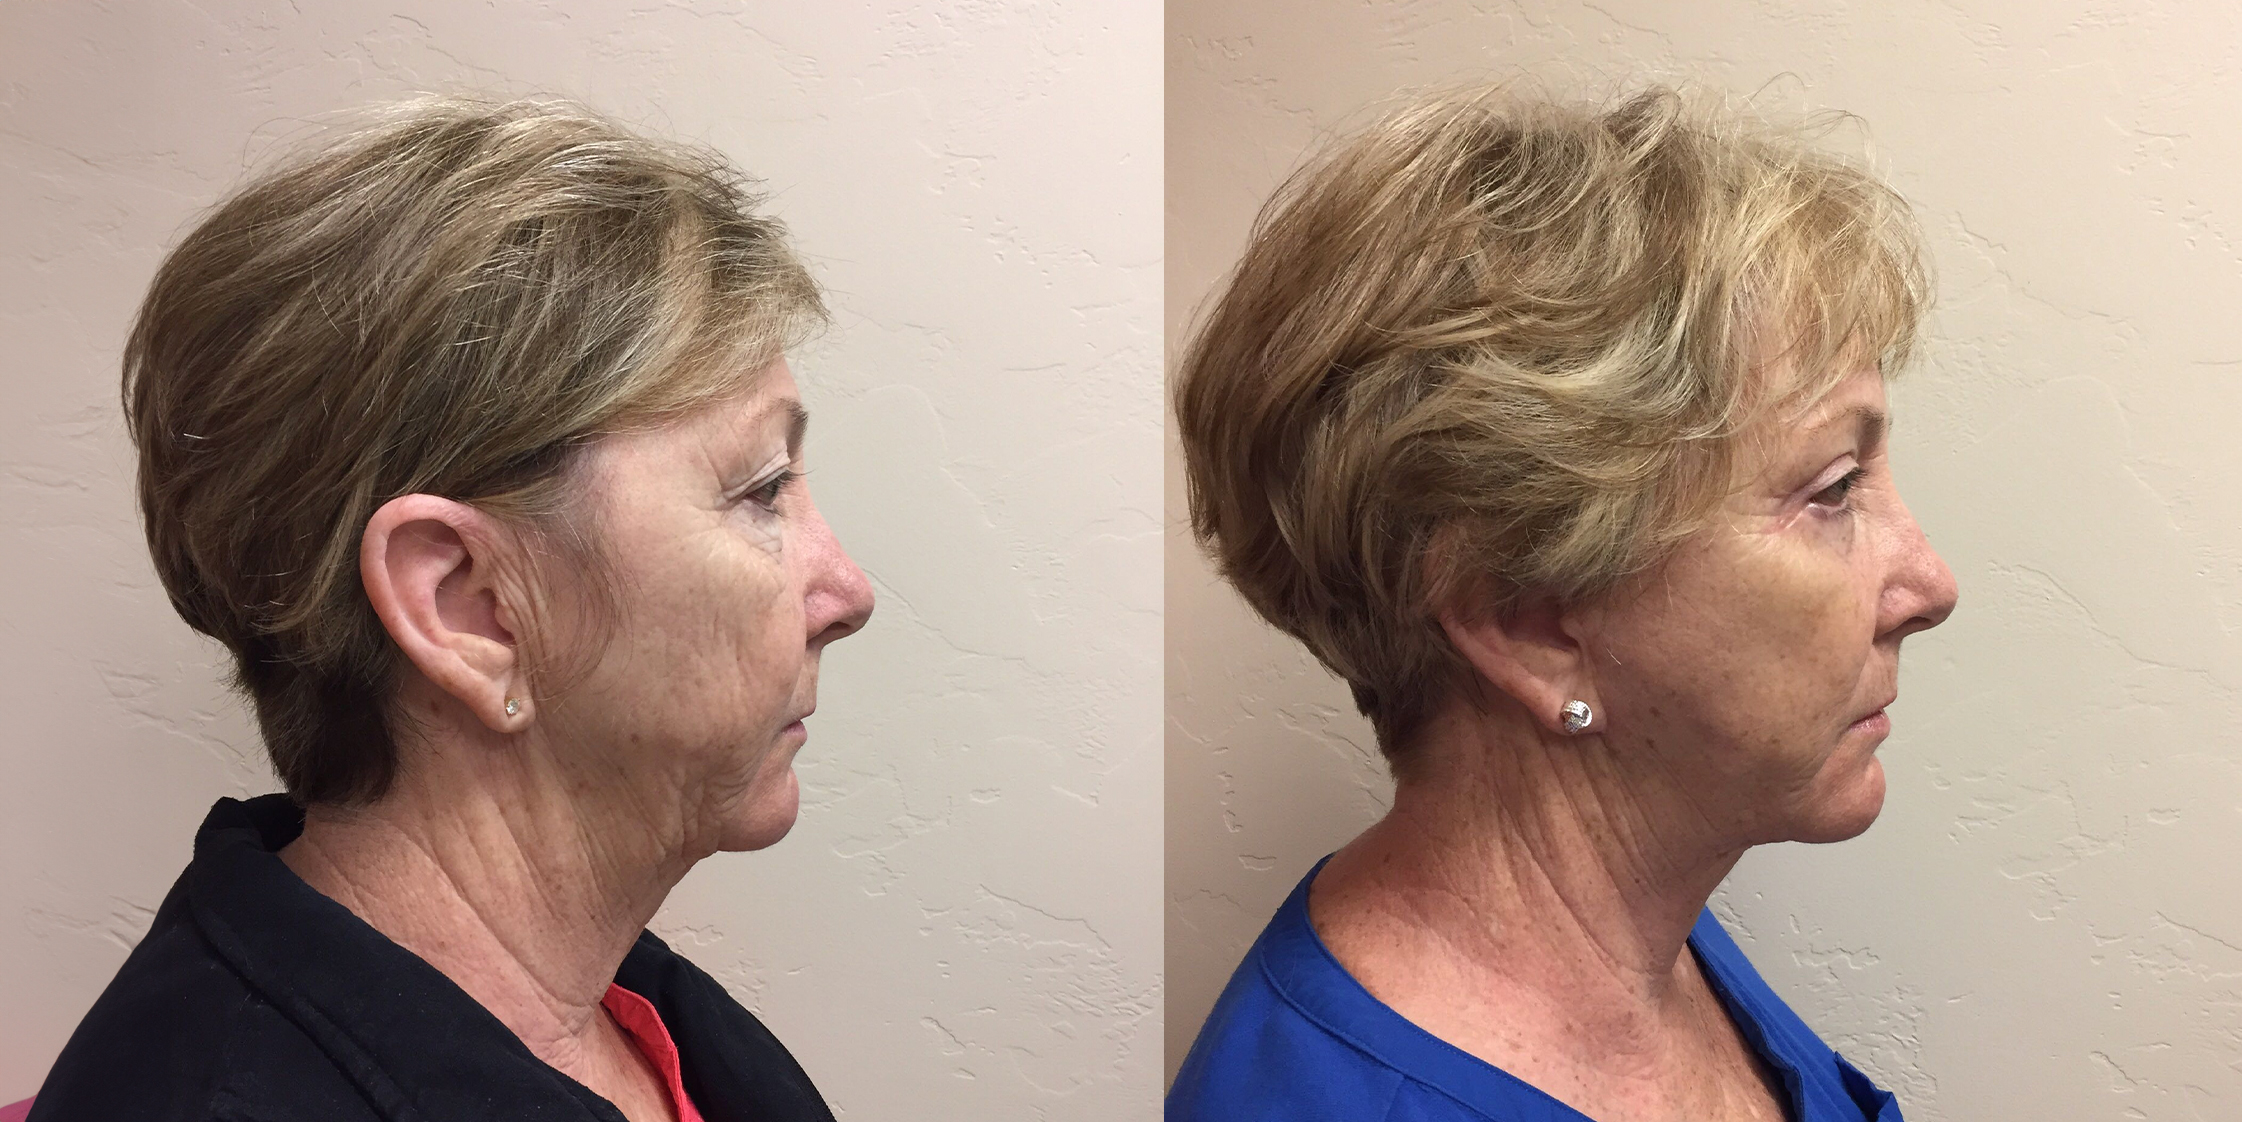 Hess-Sandeen-Facelift-Tucson-before-after5-1024x683